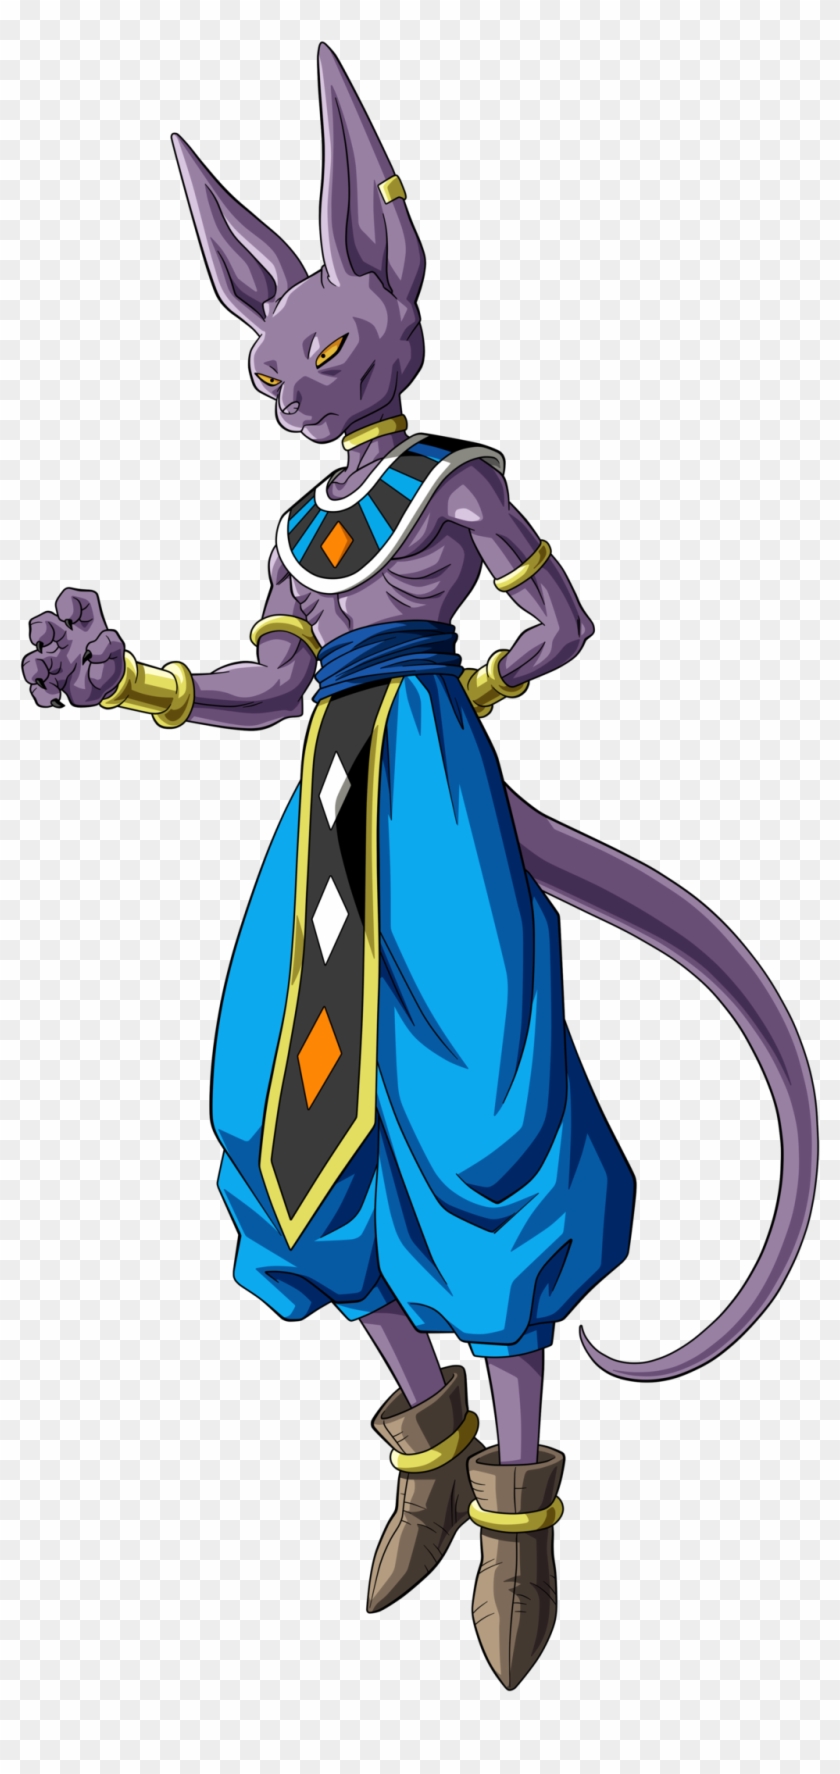 Welcome To Reddit, - Dragon Ball Z Beerus #315851